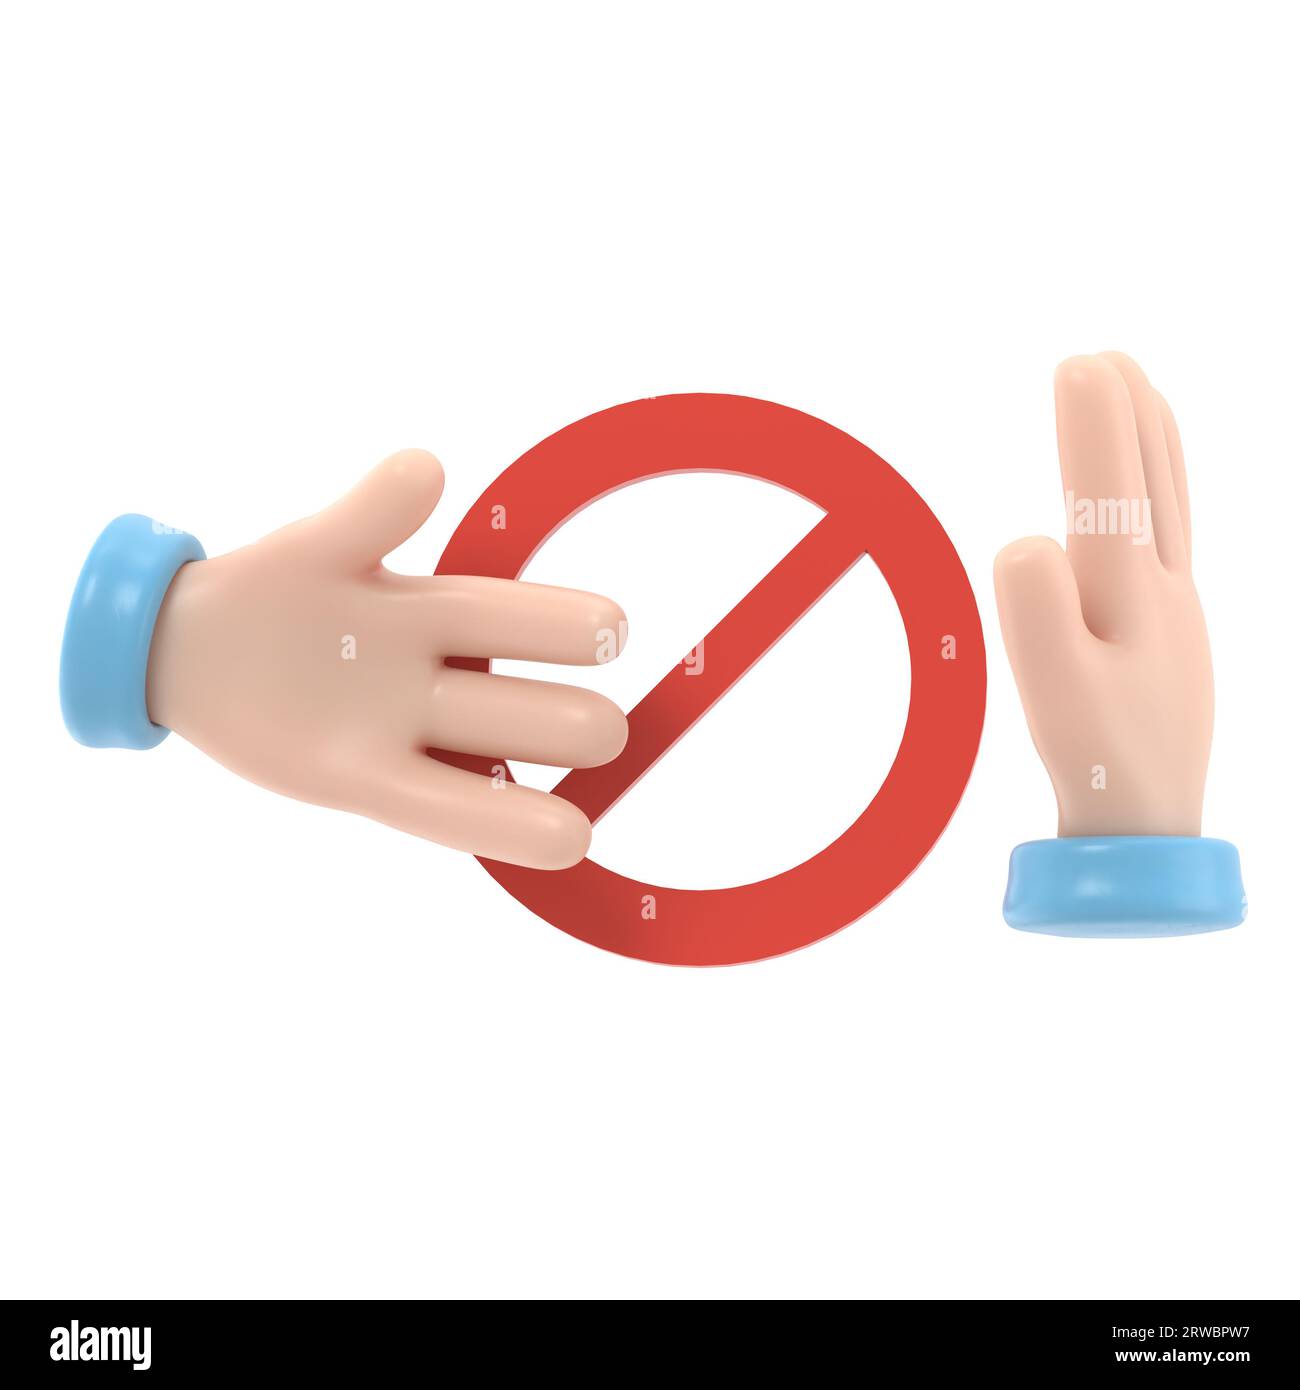 Do not contact. No handshake icon. Red prohibition sign. Precautions and prevention of coronavirus disease. No physical contact. Warning,dangerous inf Stock Photo